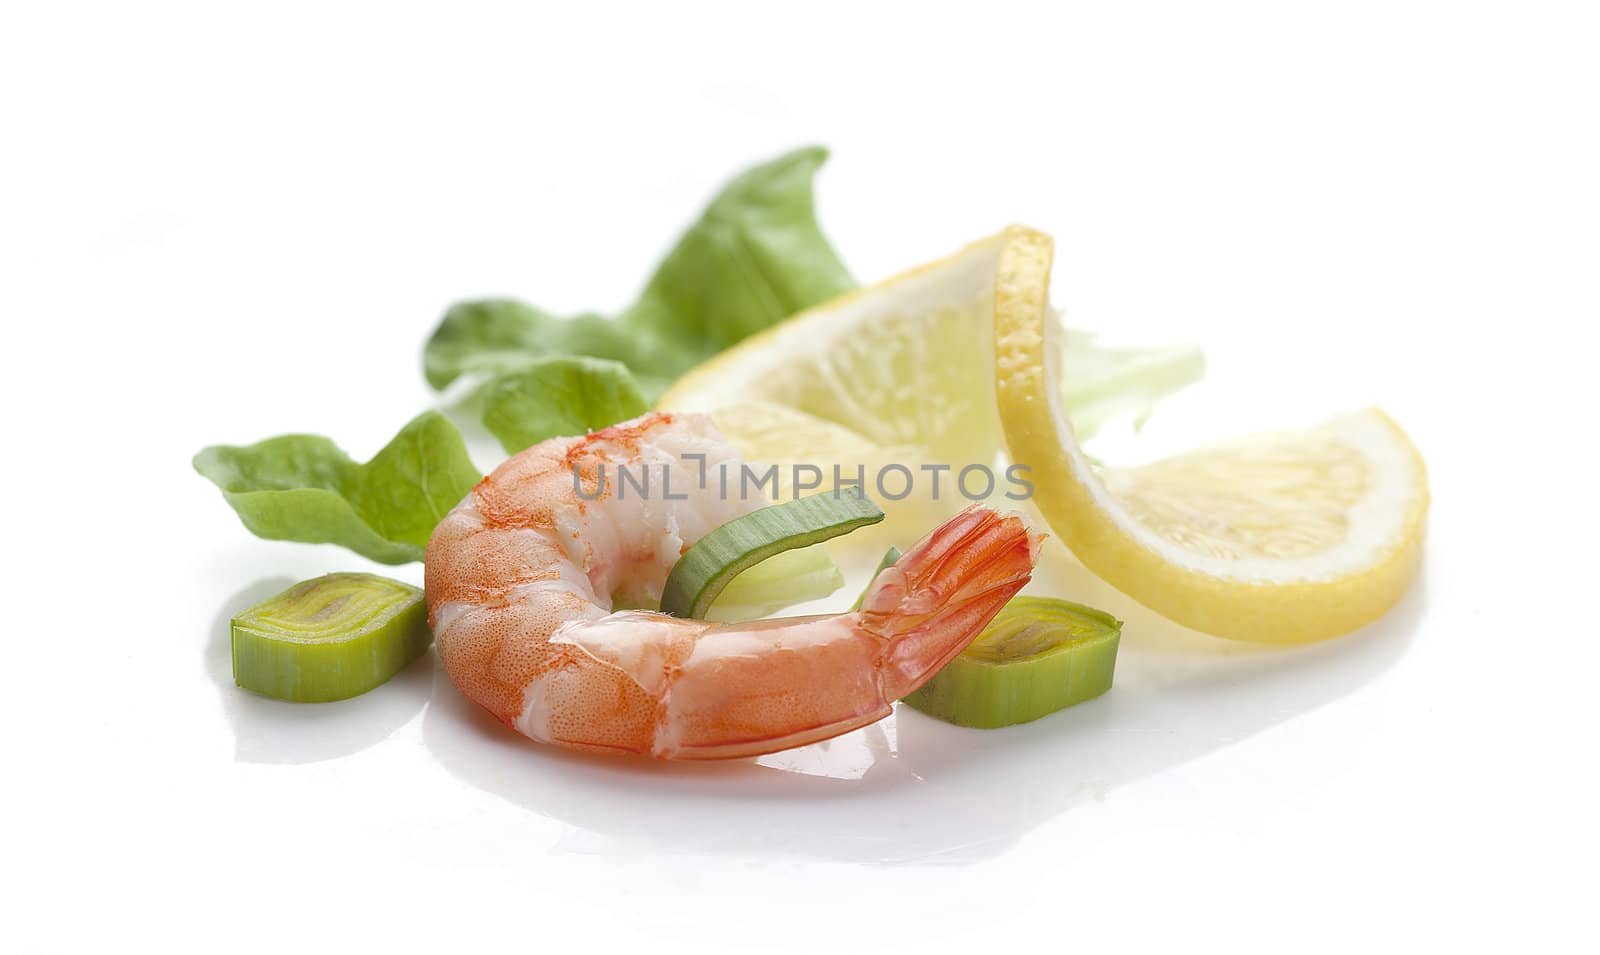 One boiled shrimp's tail with  lettuce, leek and lemon on the white